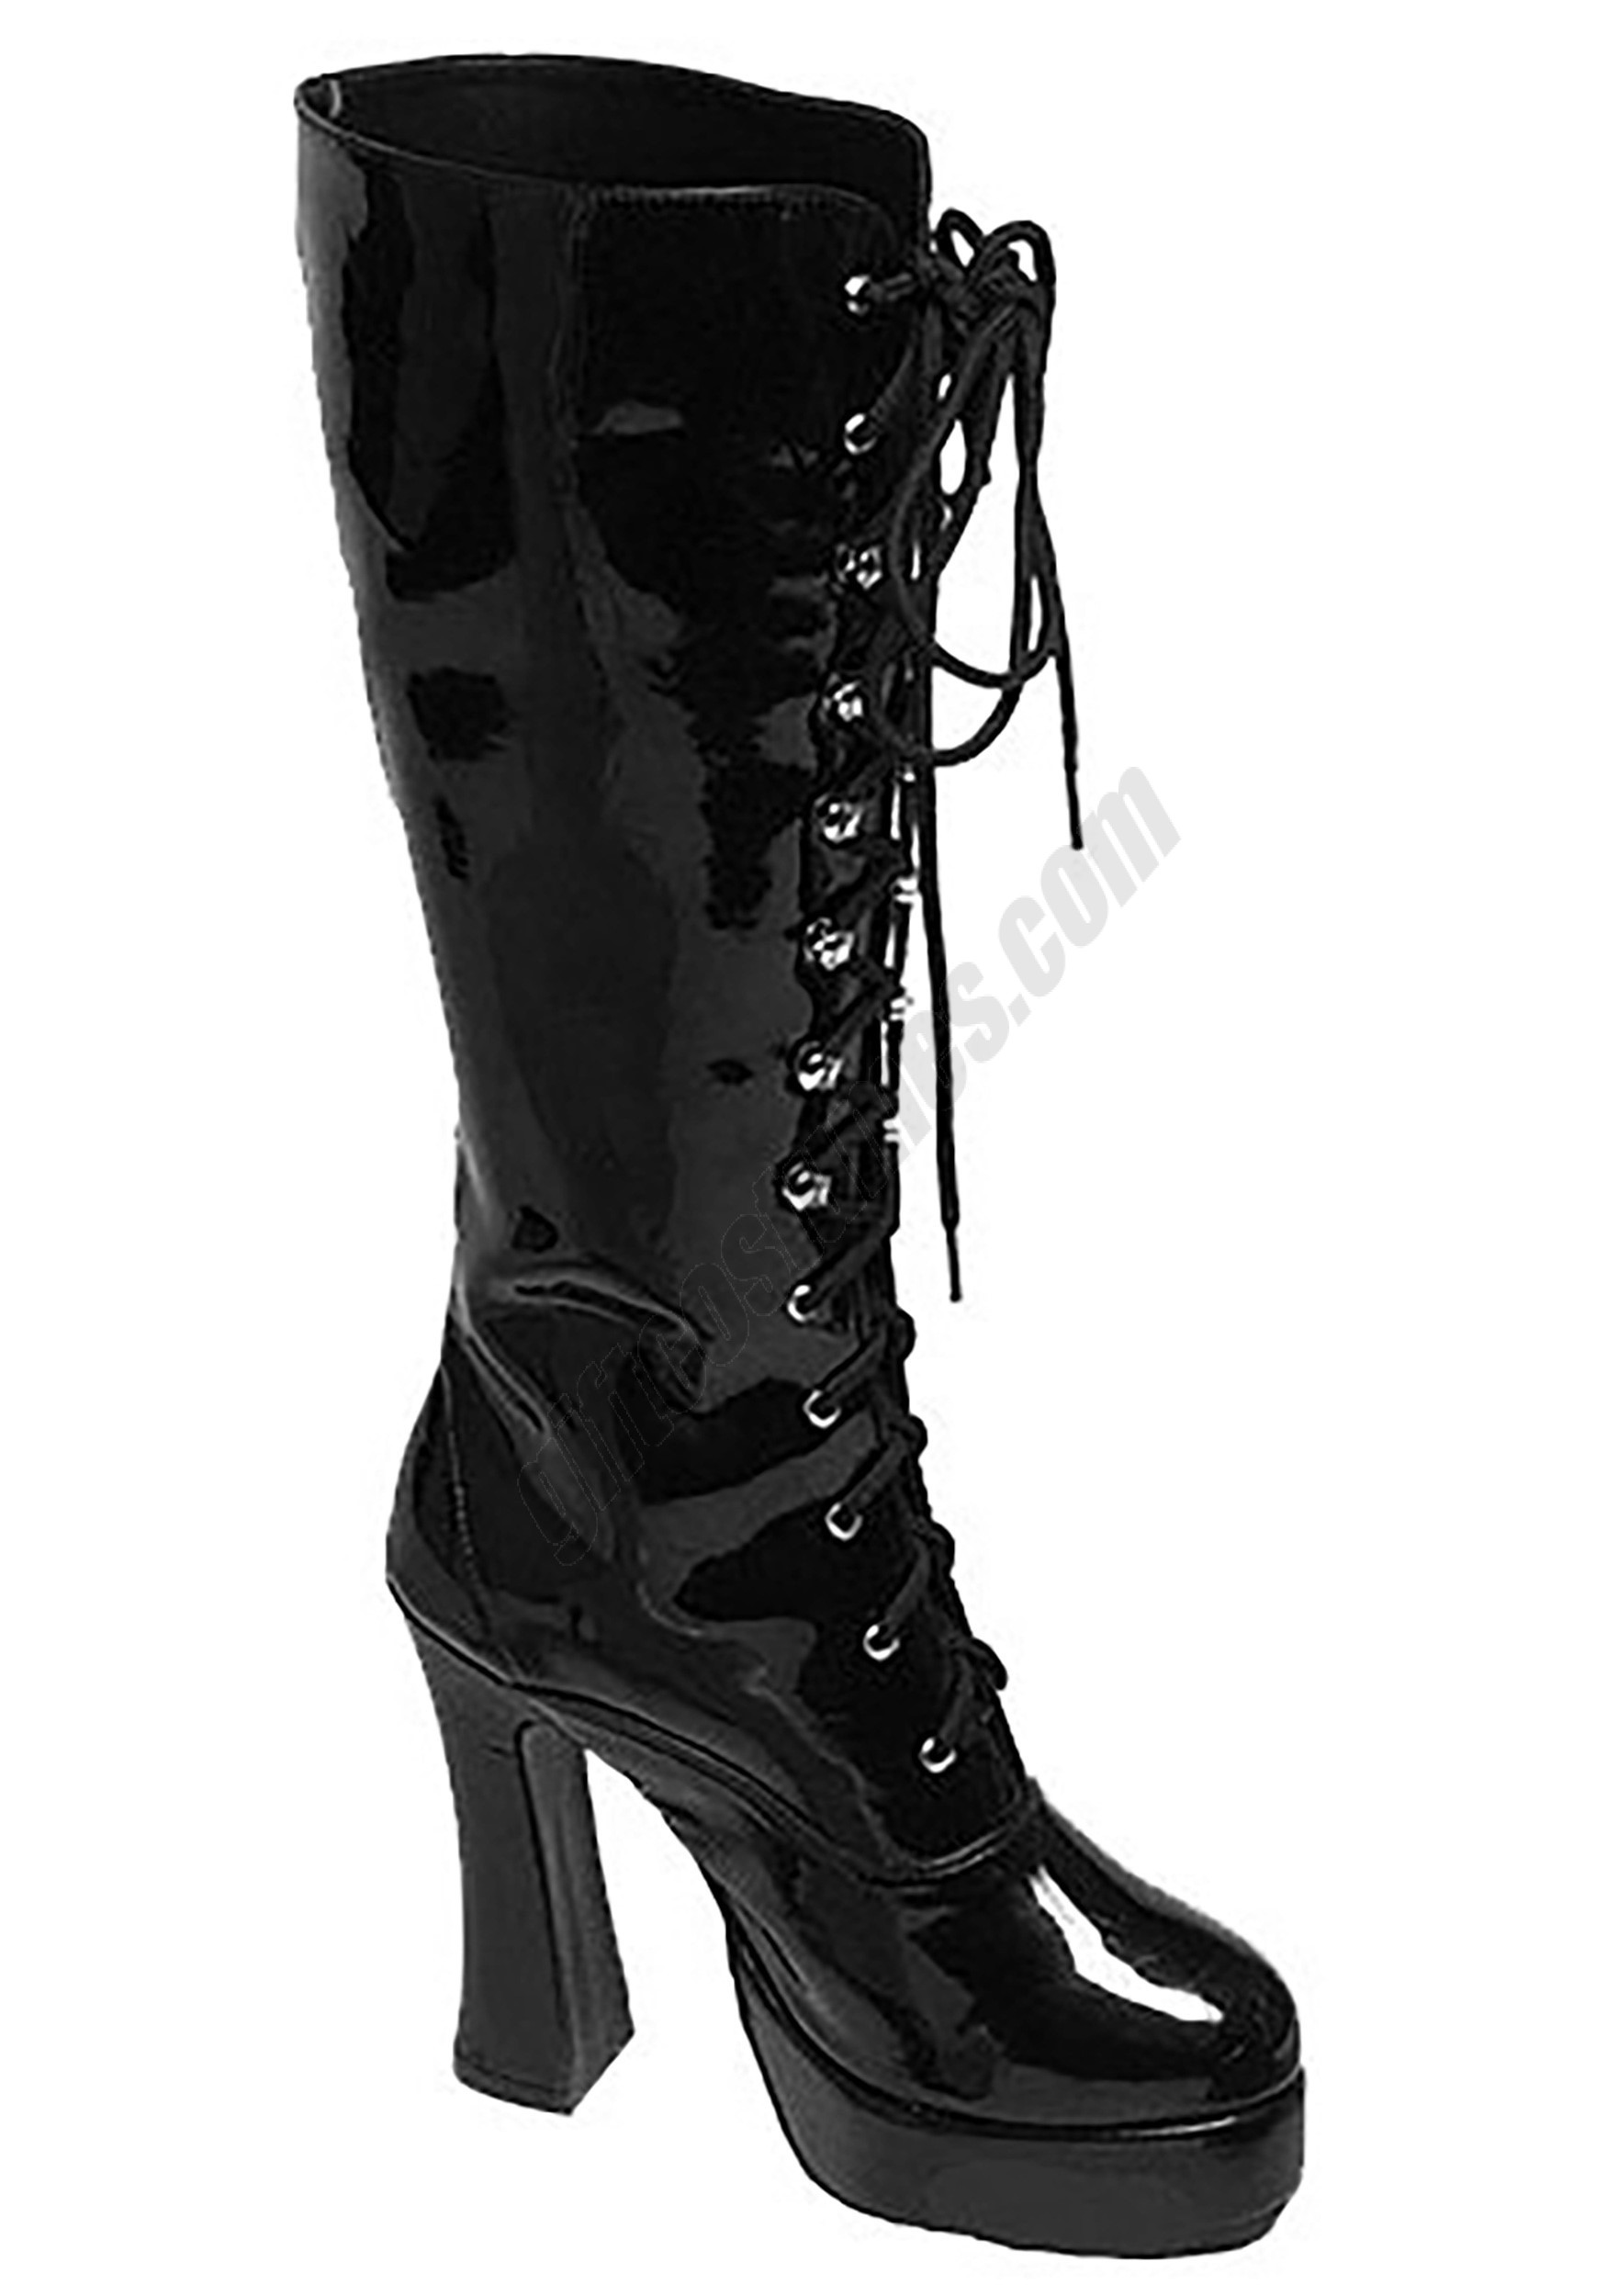 Sexy Black Faux Leather Knee High Boots Promotions - Sexy Black Faux Leather Knee High Boots Promotions